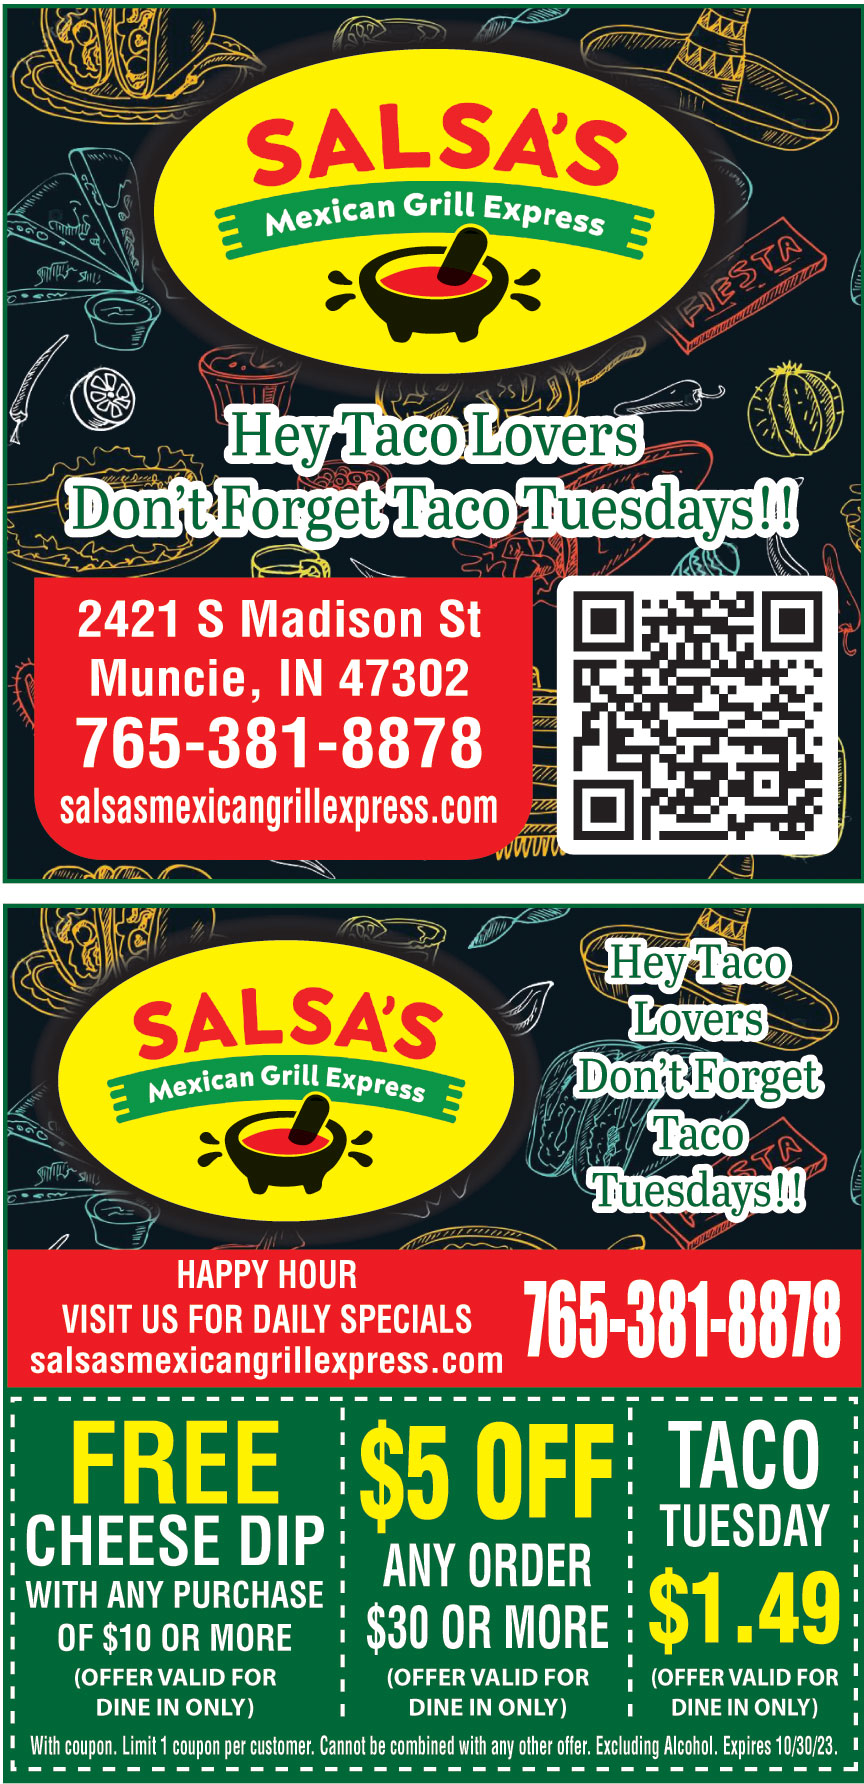 SALSAS MEXICAN GRILL